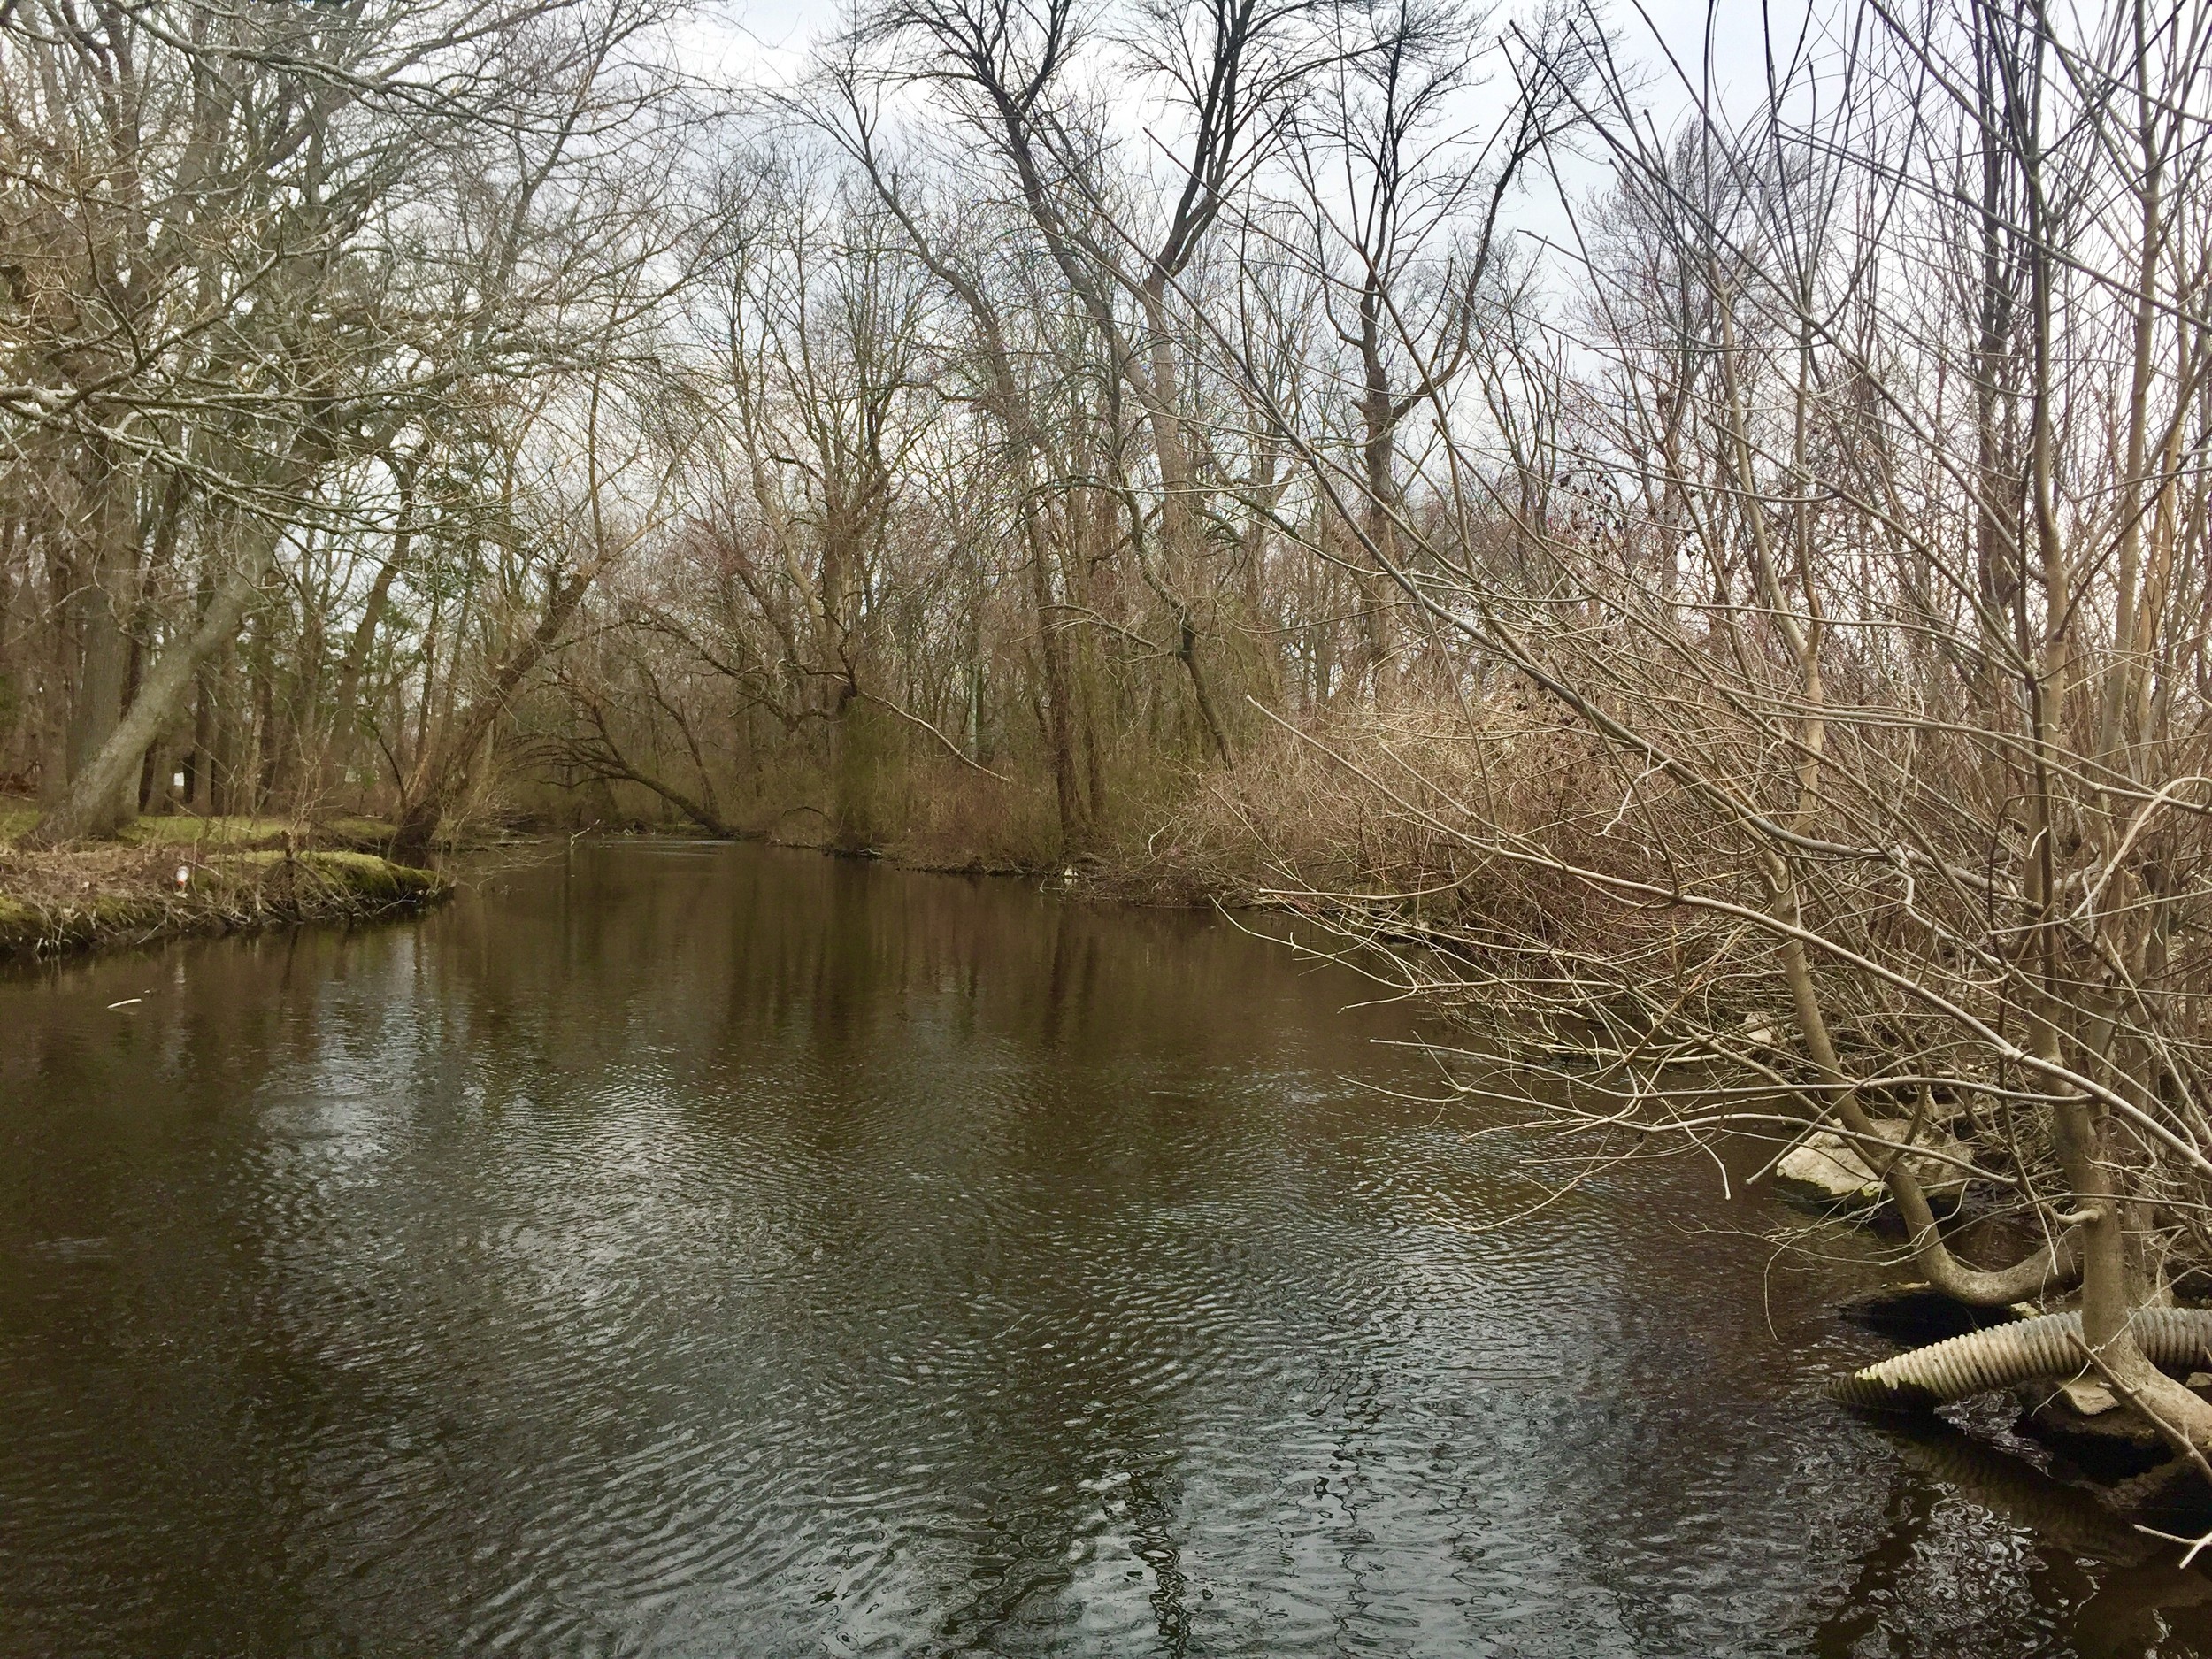 The Ten Mile River as it runs through the Agawam Hunt Club in Rumford. Preservation and access to the river was a key component in an agreement made between the club and The Nature Conservancy announced Monday, April 16.